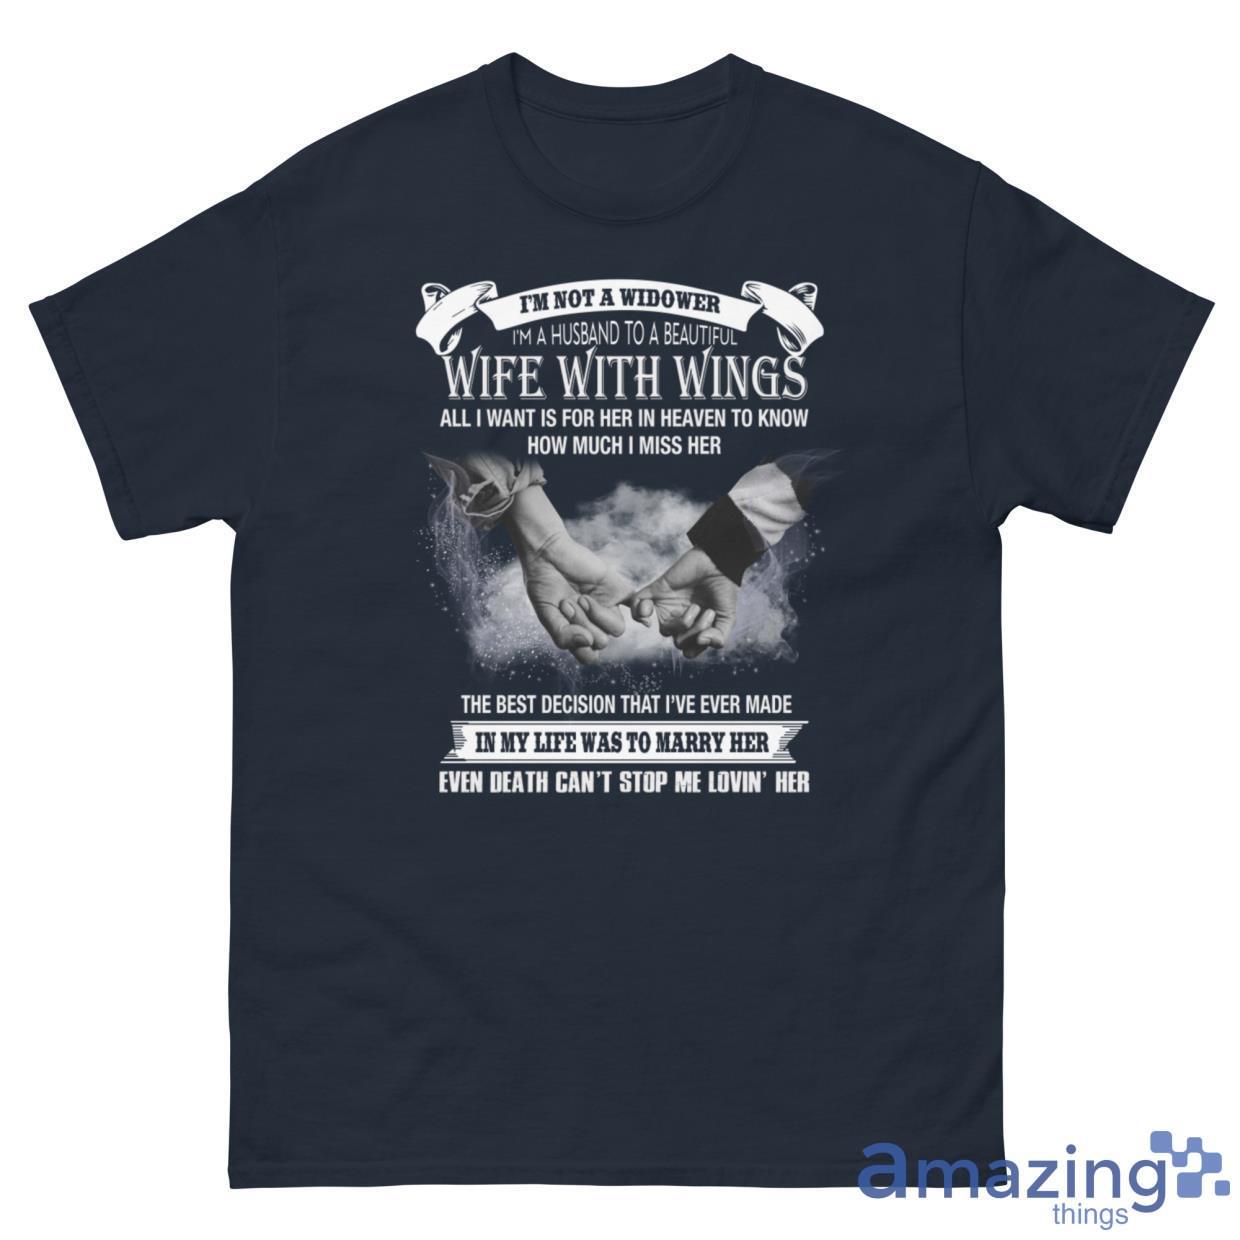 Im Not A Widower, Im A Husband To A Beautiful Wife With Wings Shirt - G500 Men’s Classic Tee-1